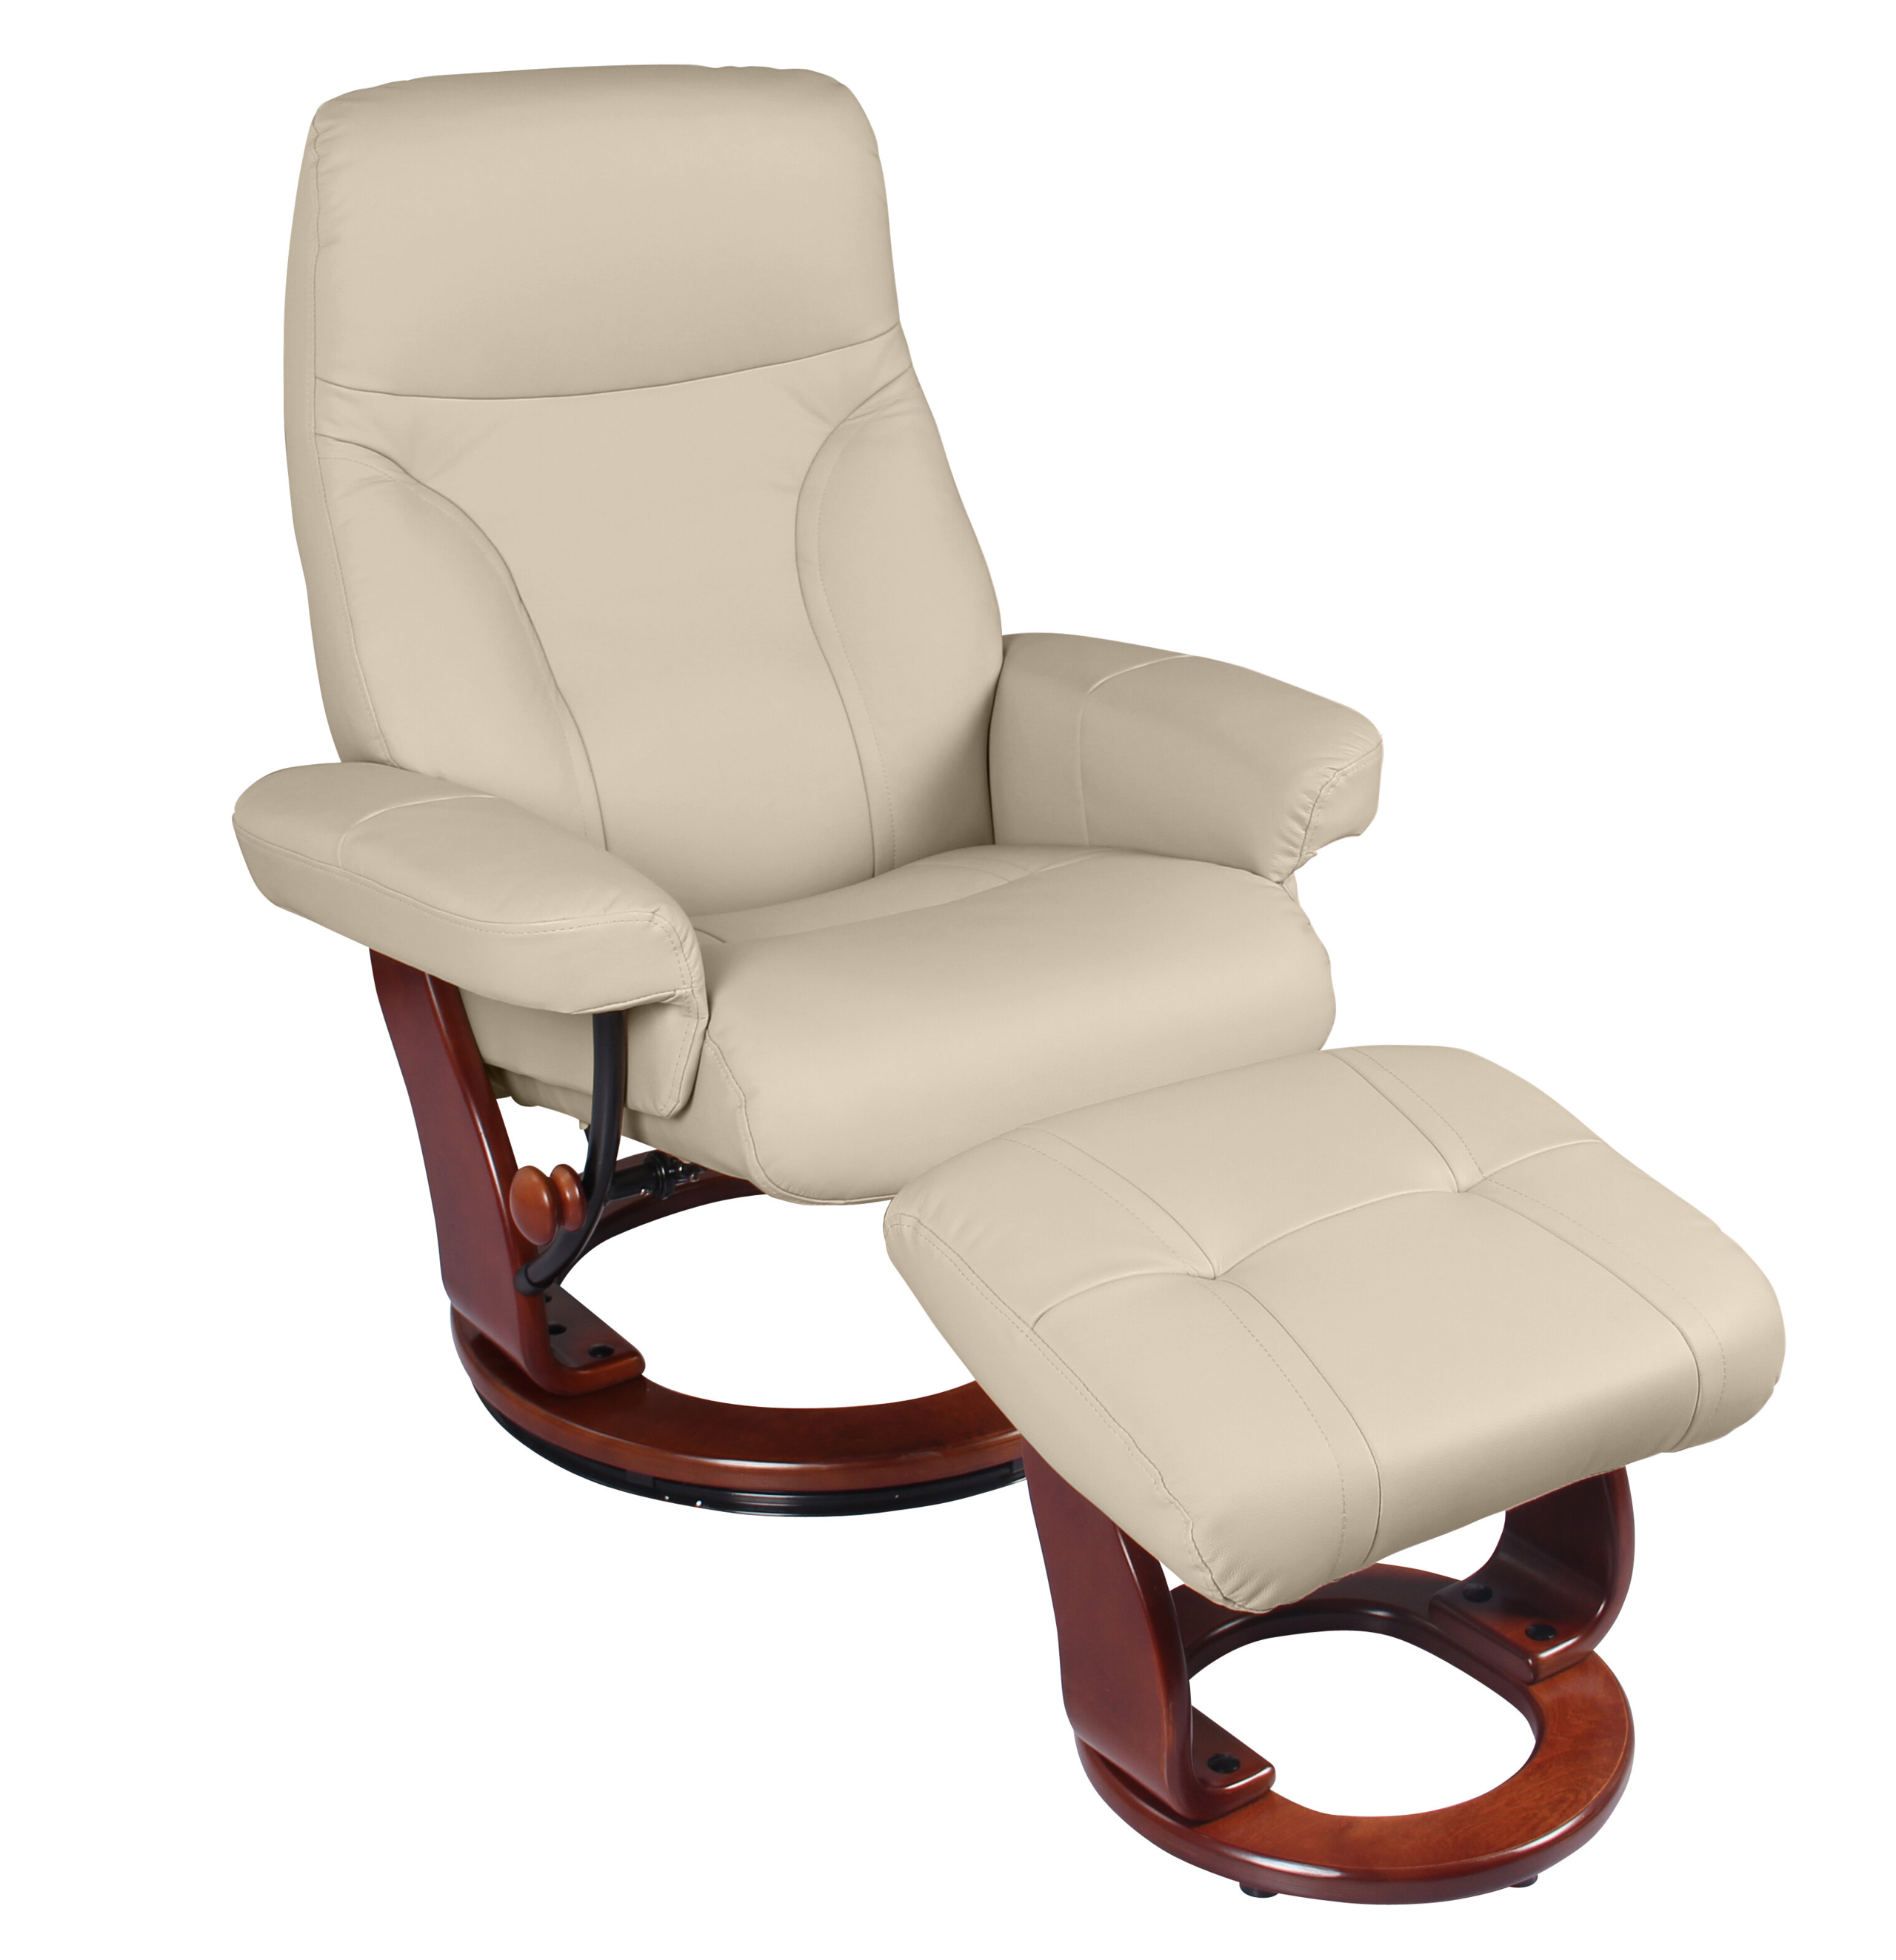 Leather Swivel Reclining Chairs, Real Leather Swivel Recliner Chair